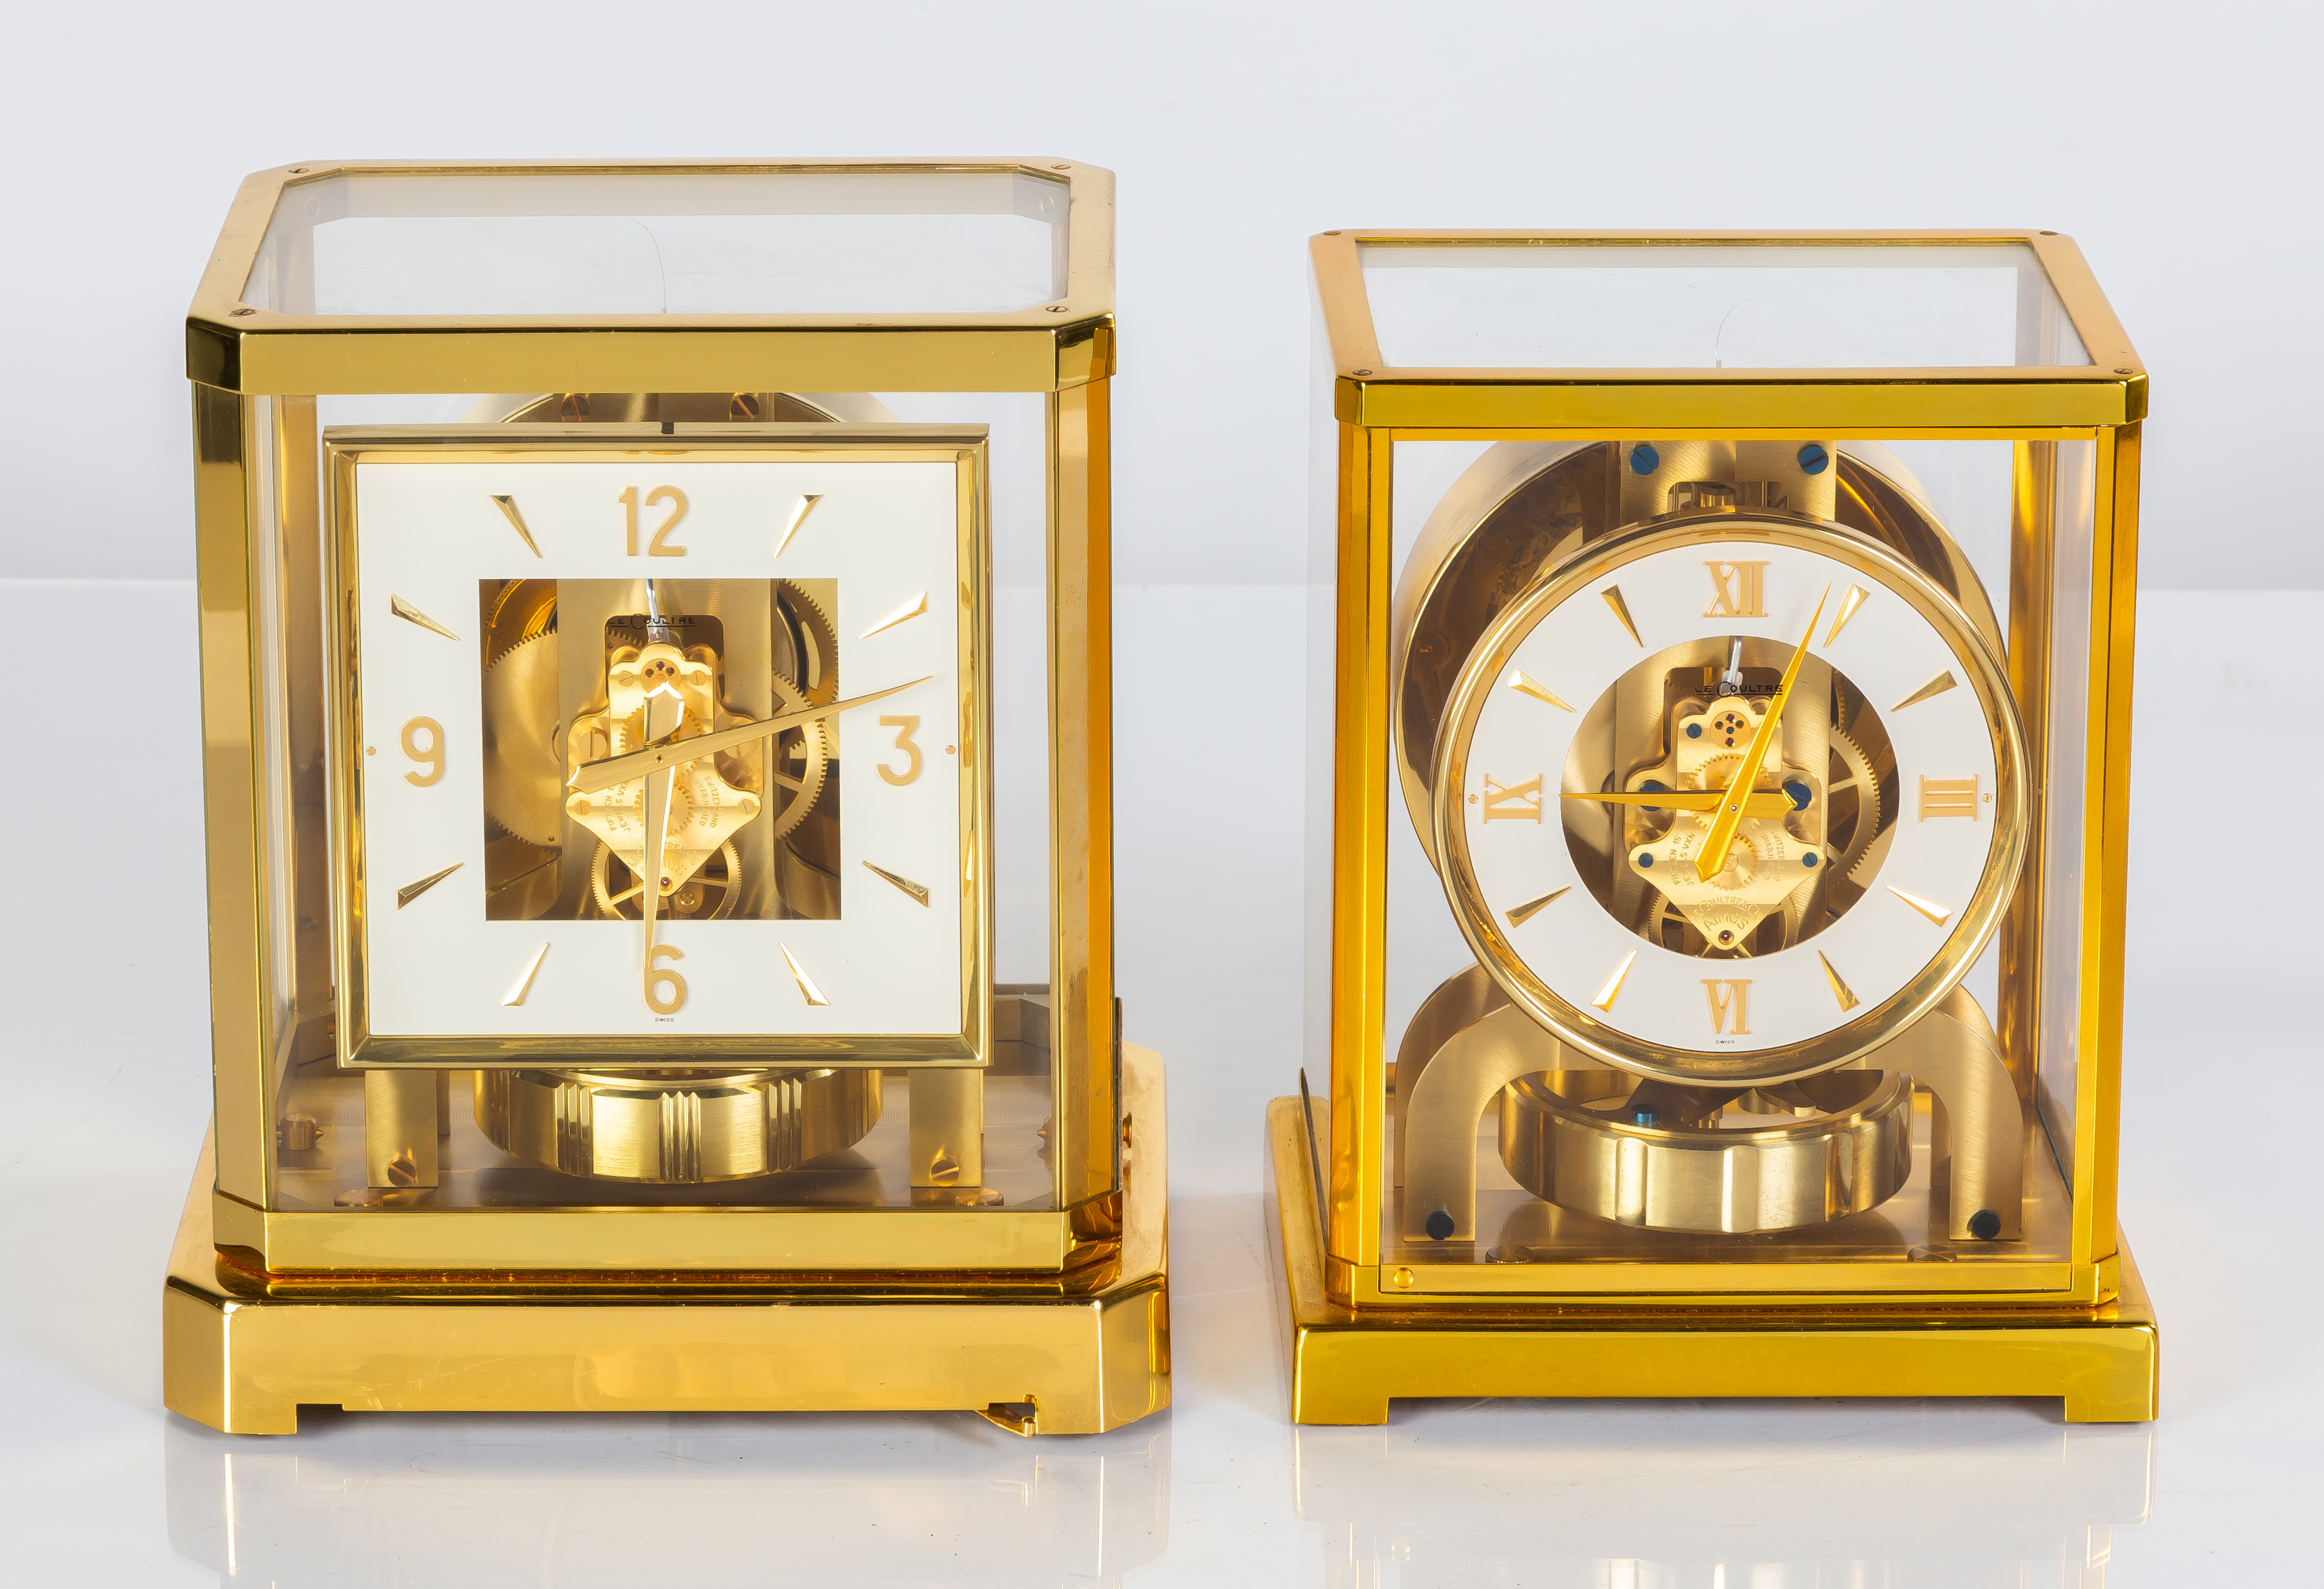  2 LE COULTRE ATMOS CLOCKS 2  2f3745